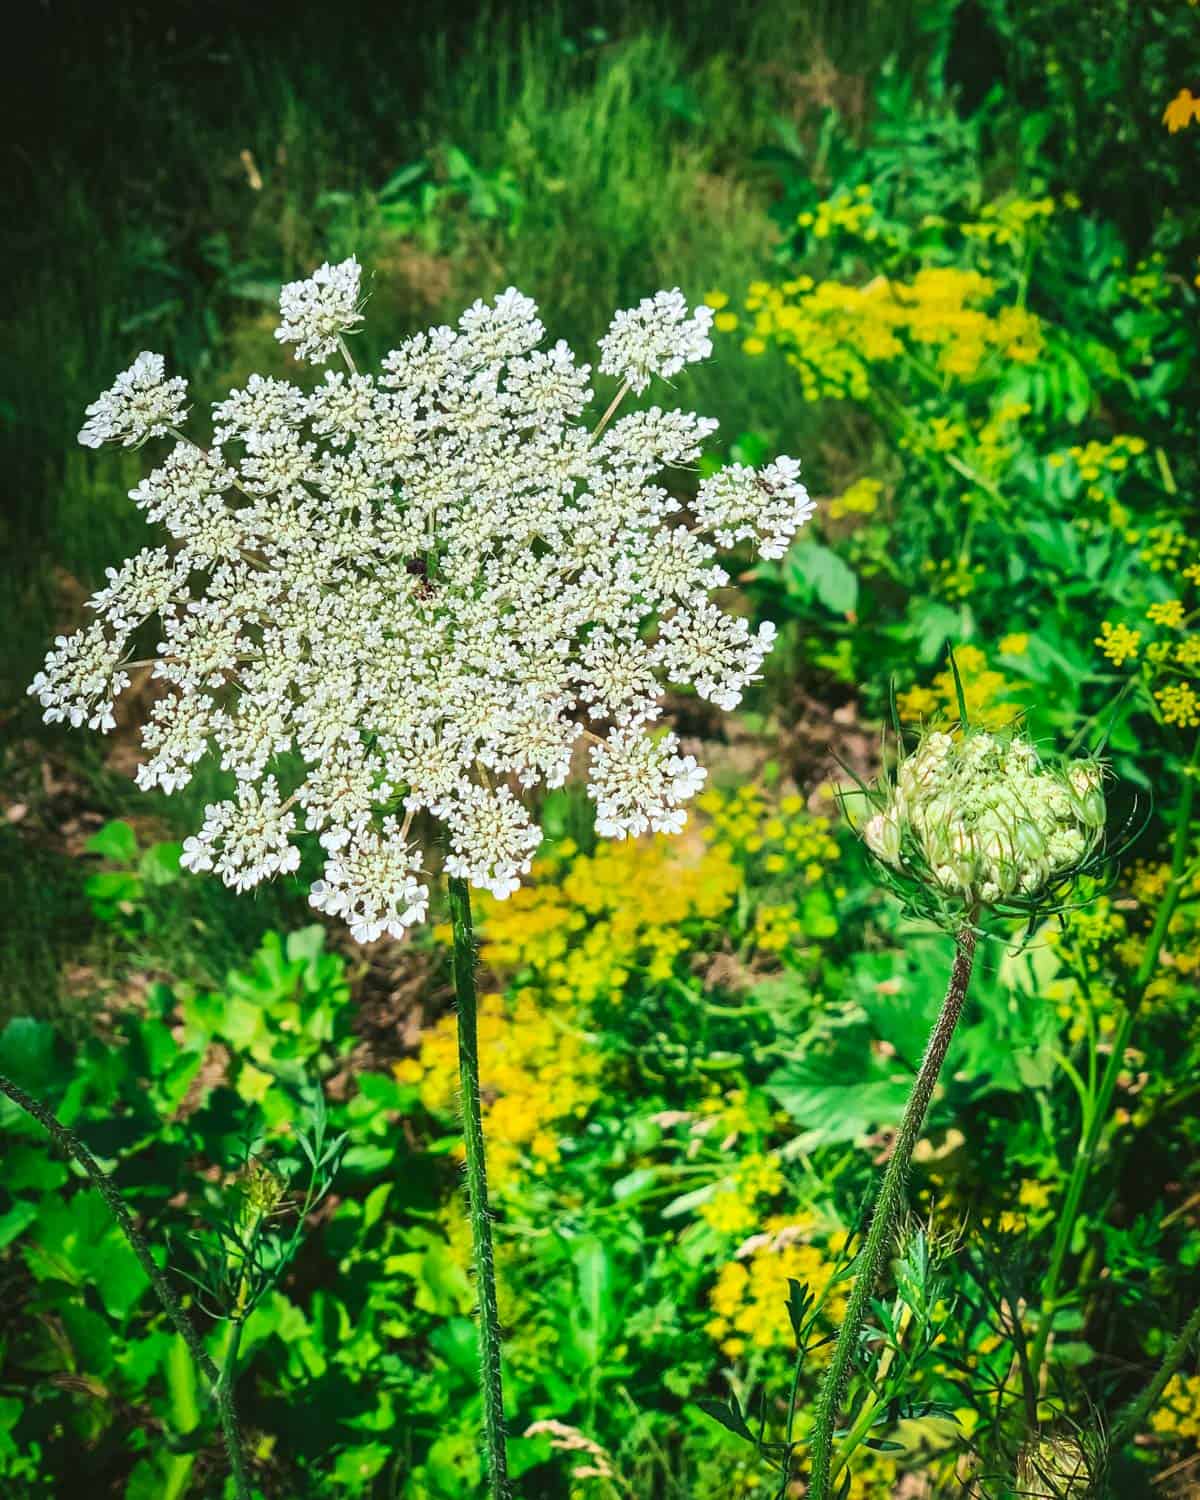 Top view of a white full bloom Queen Anne's lace flower, with green grassy background growing some low yellow flowers. 